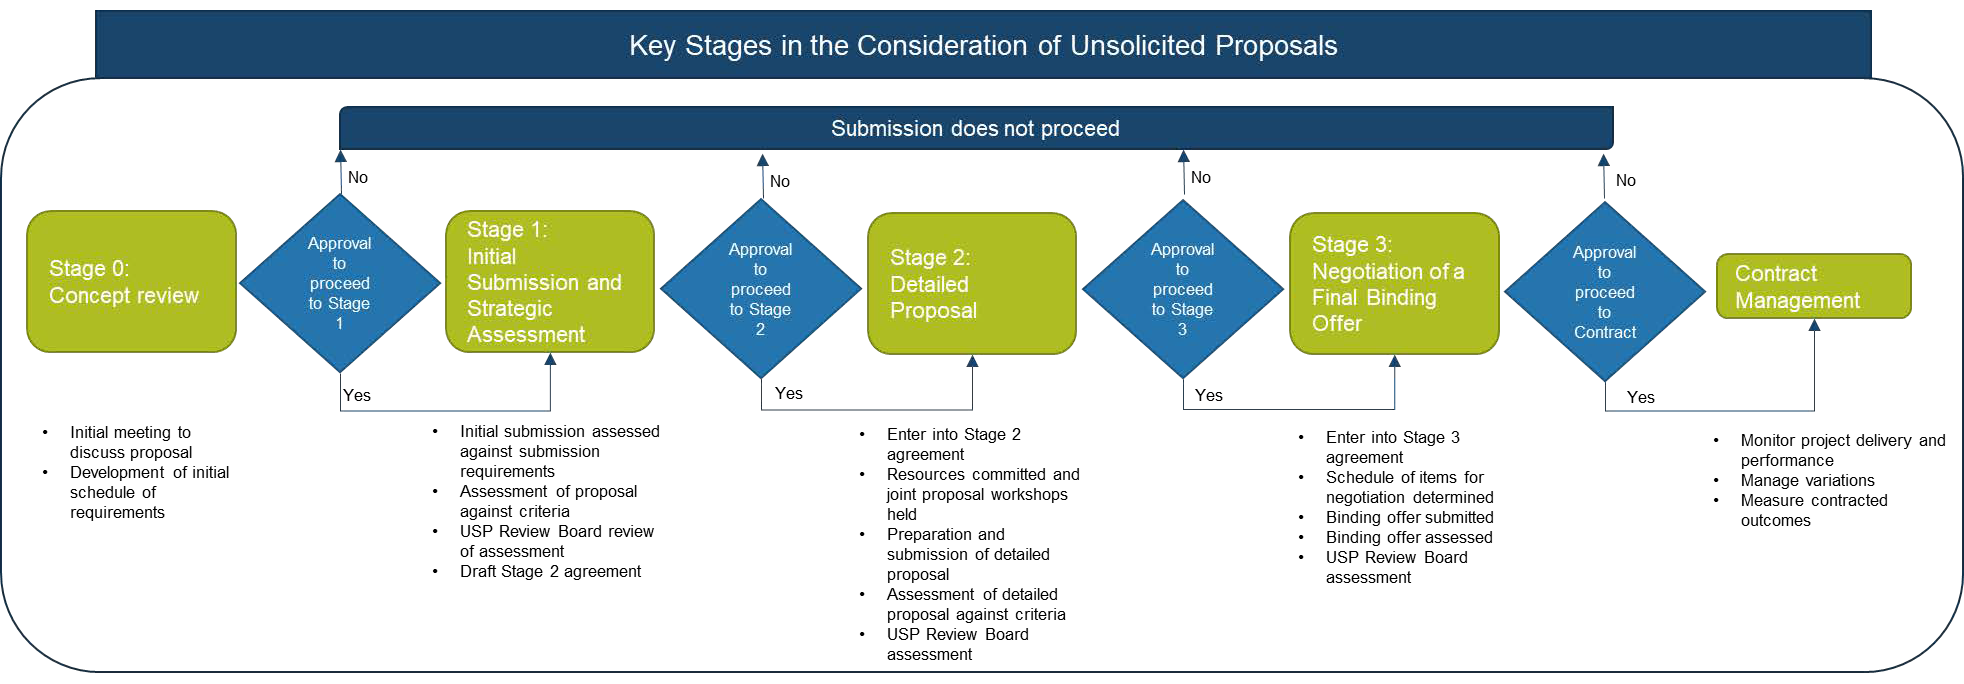 Key states in the consideration of unsolicited proposals